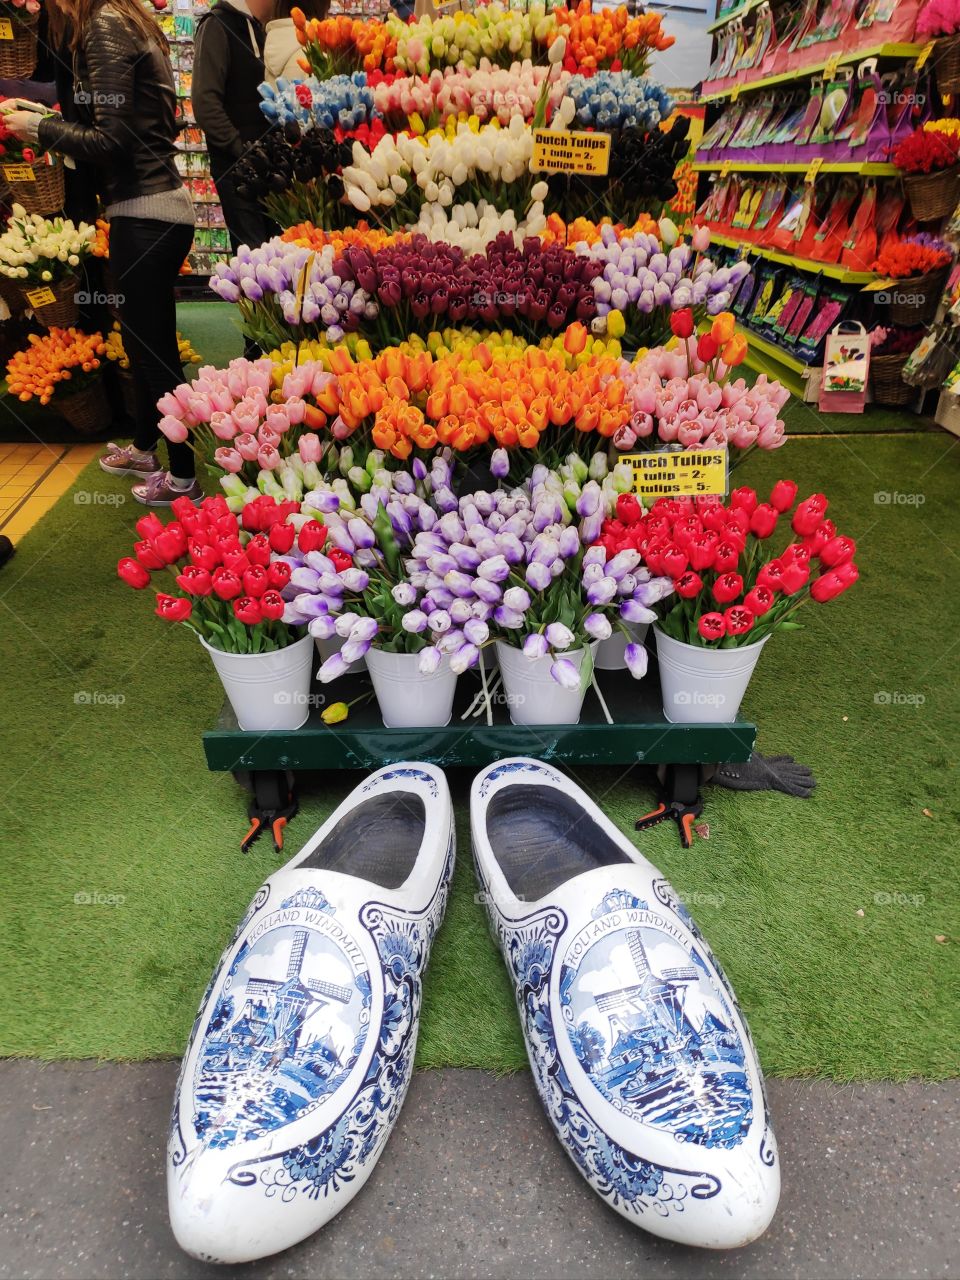 Dutch tulips and shoes market